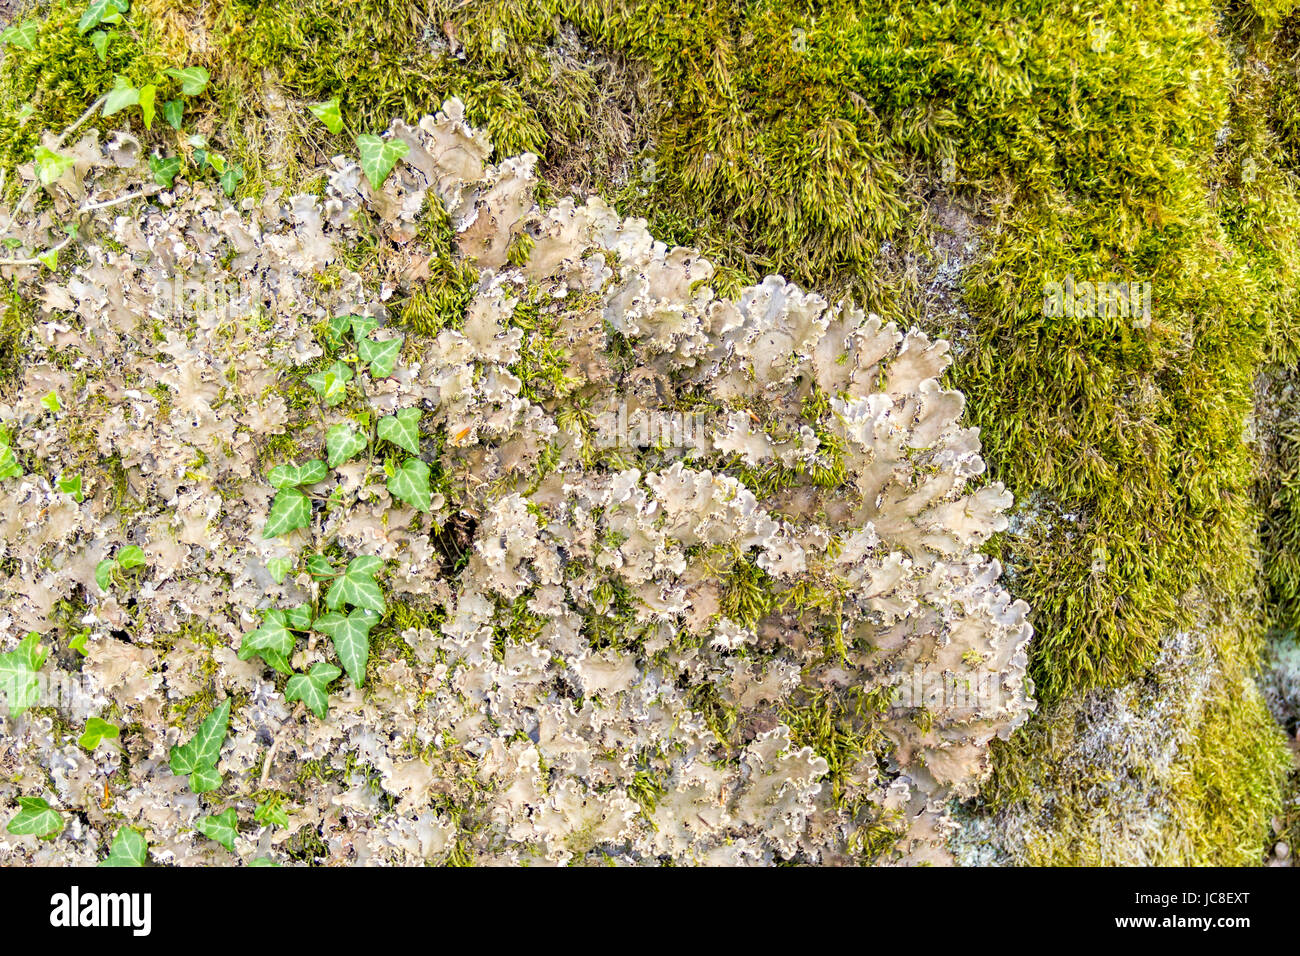 detail of  a endangered lichen species named Scaly Dog Lichen Stock Photo